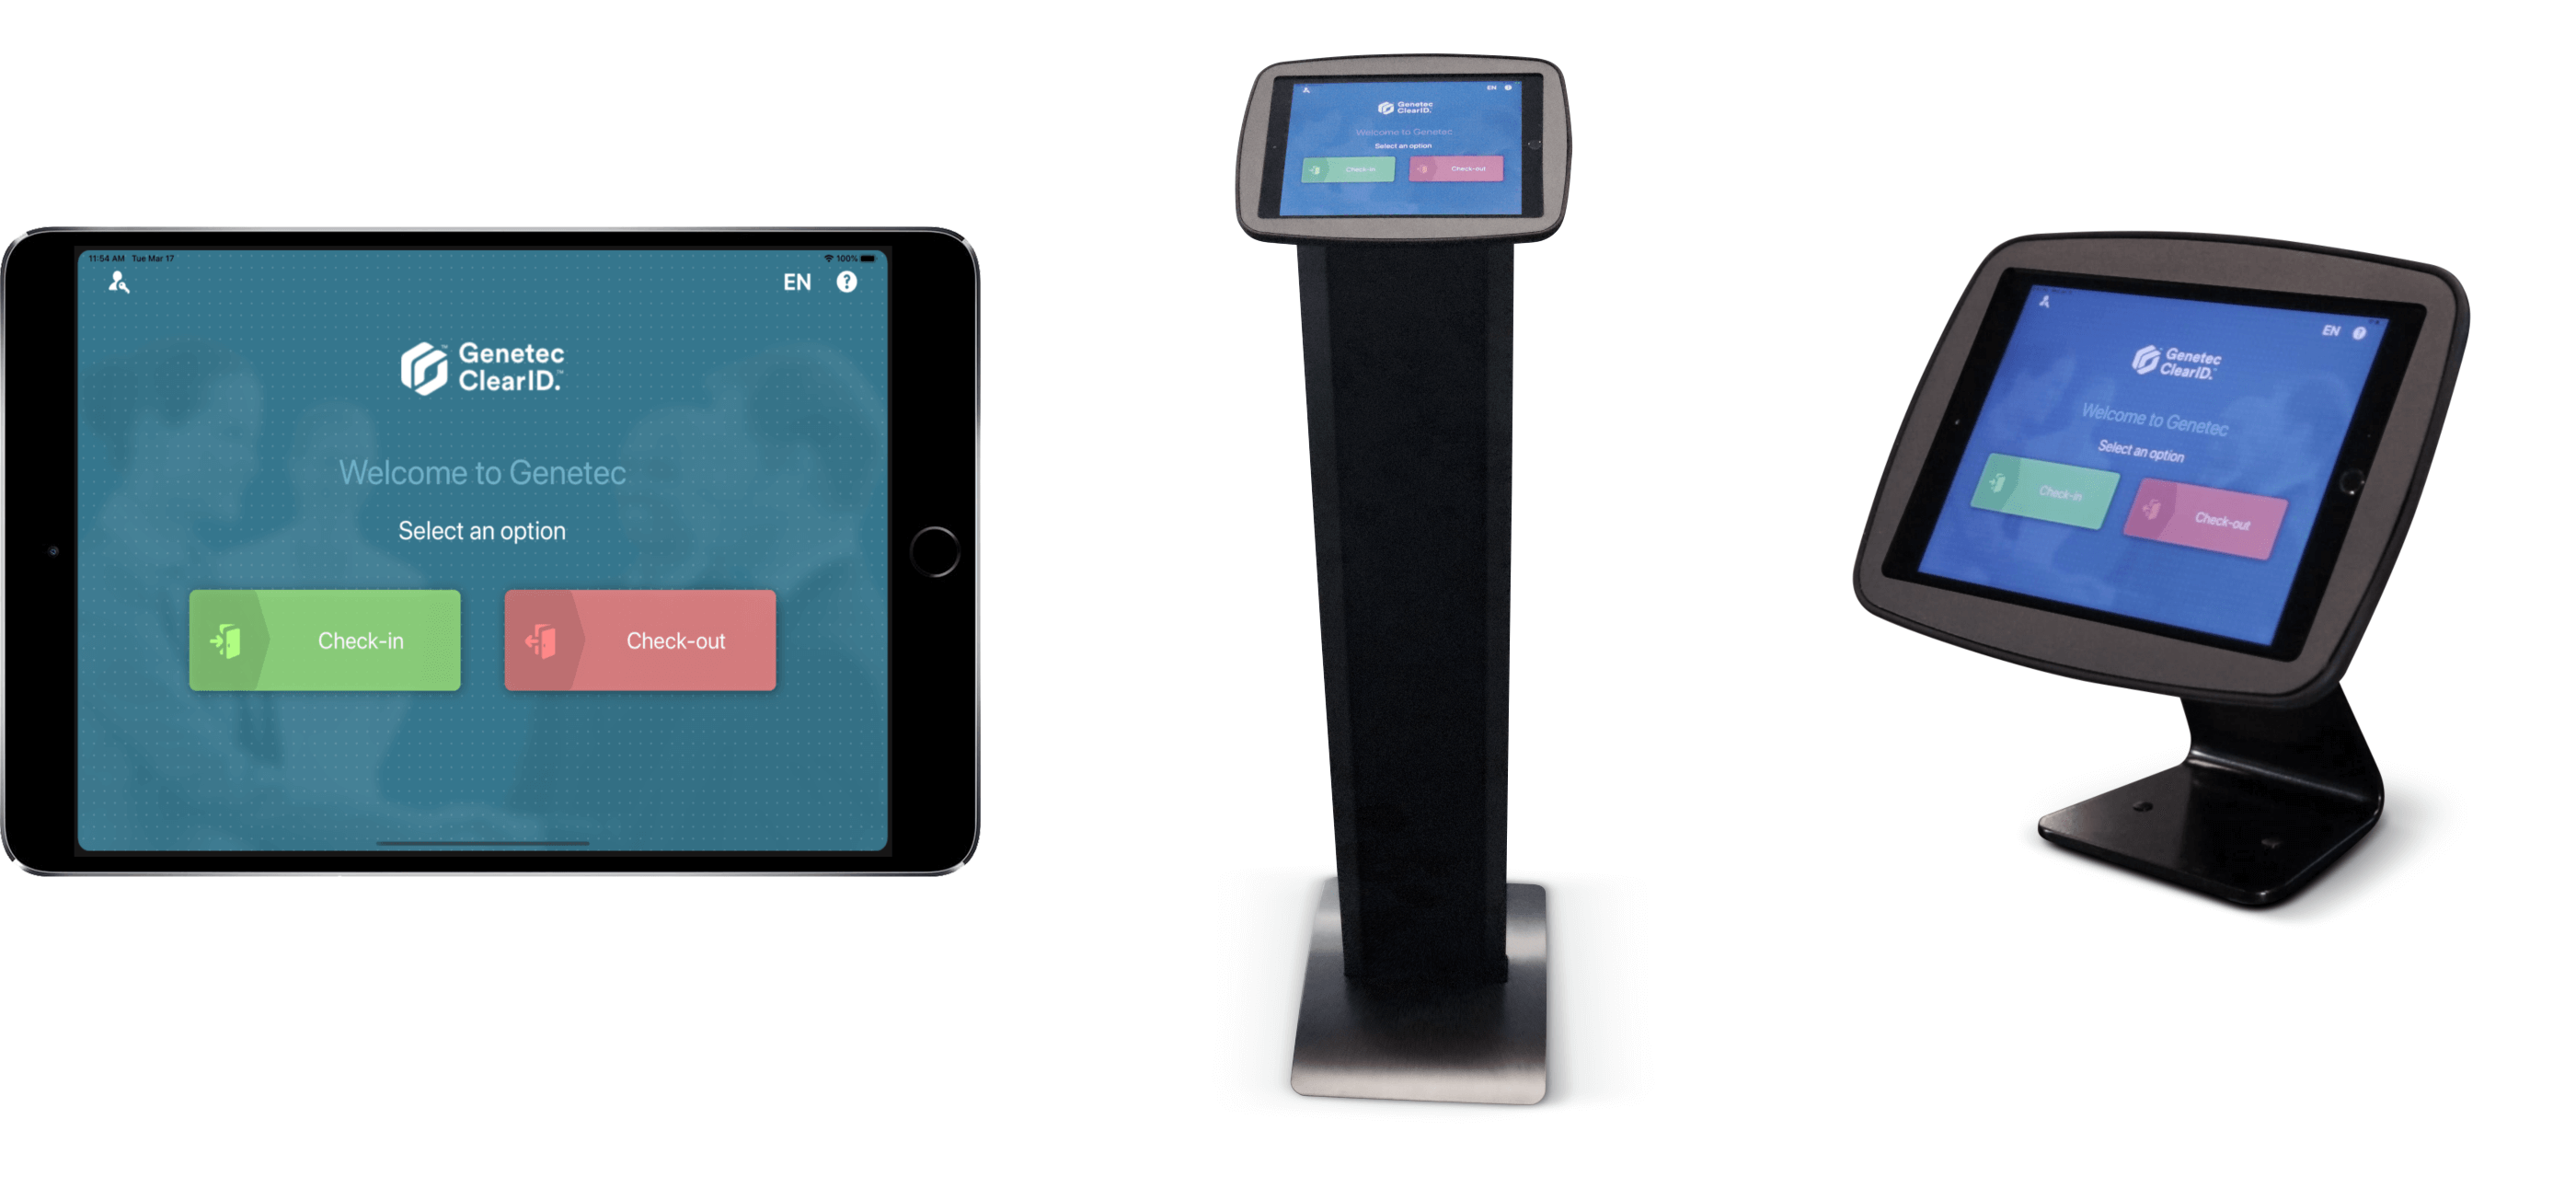 Example of Genetec ClearID™ Self-Service Kiosk mobile app showing Welcome screen on an iPad and also showing kiosk floor stand and tabletop stand options.